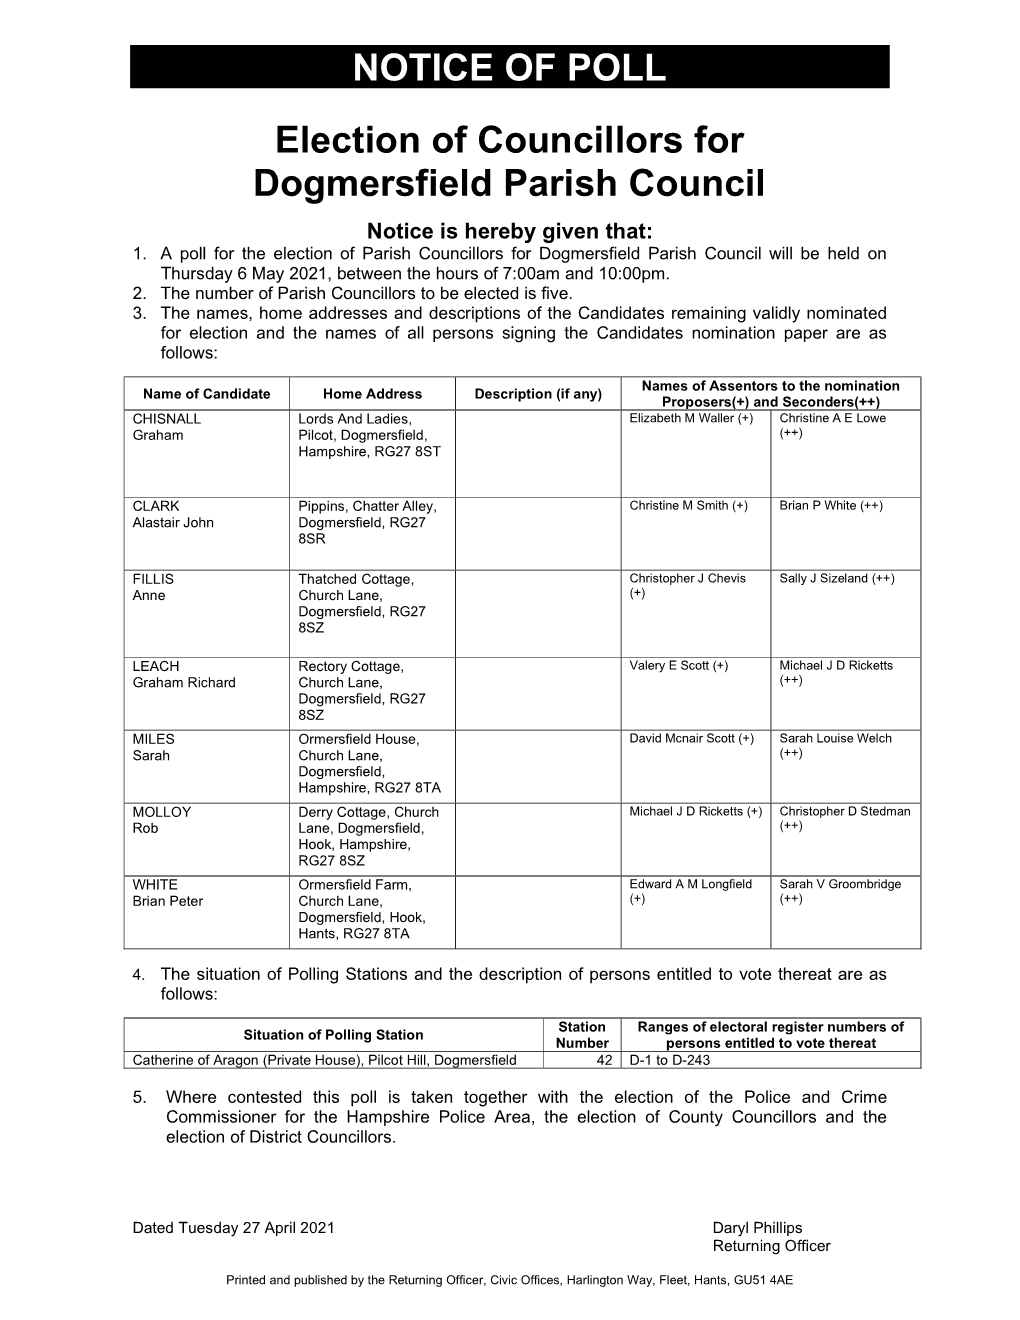 NOTICE of POLL Election of Councillors for Dogmersfield Parish